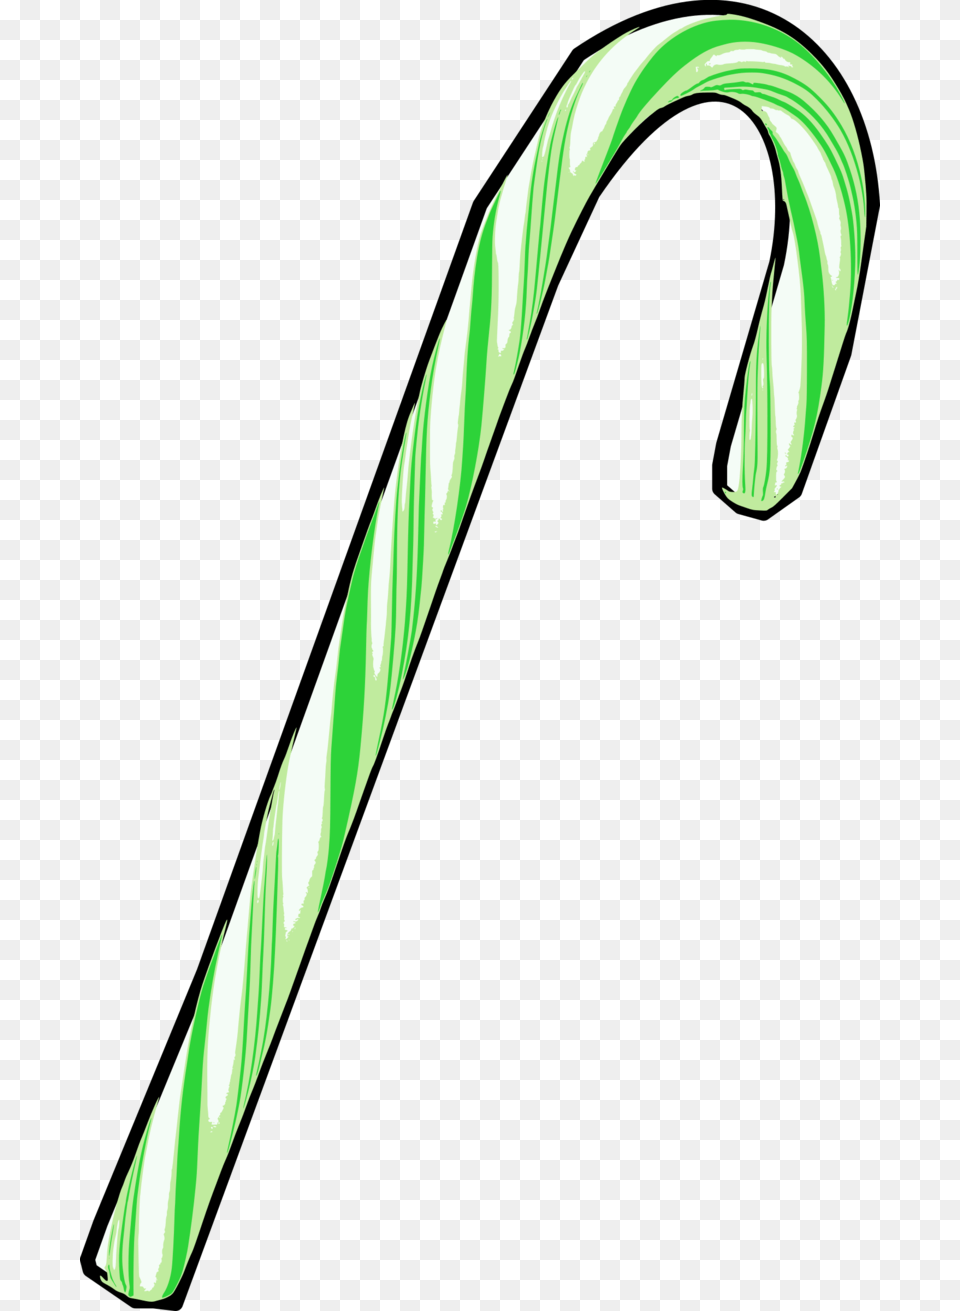 Green Candy Cane, Food, Sweets, Stick, Blade Png